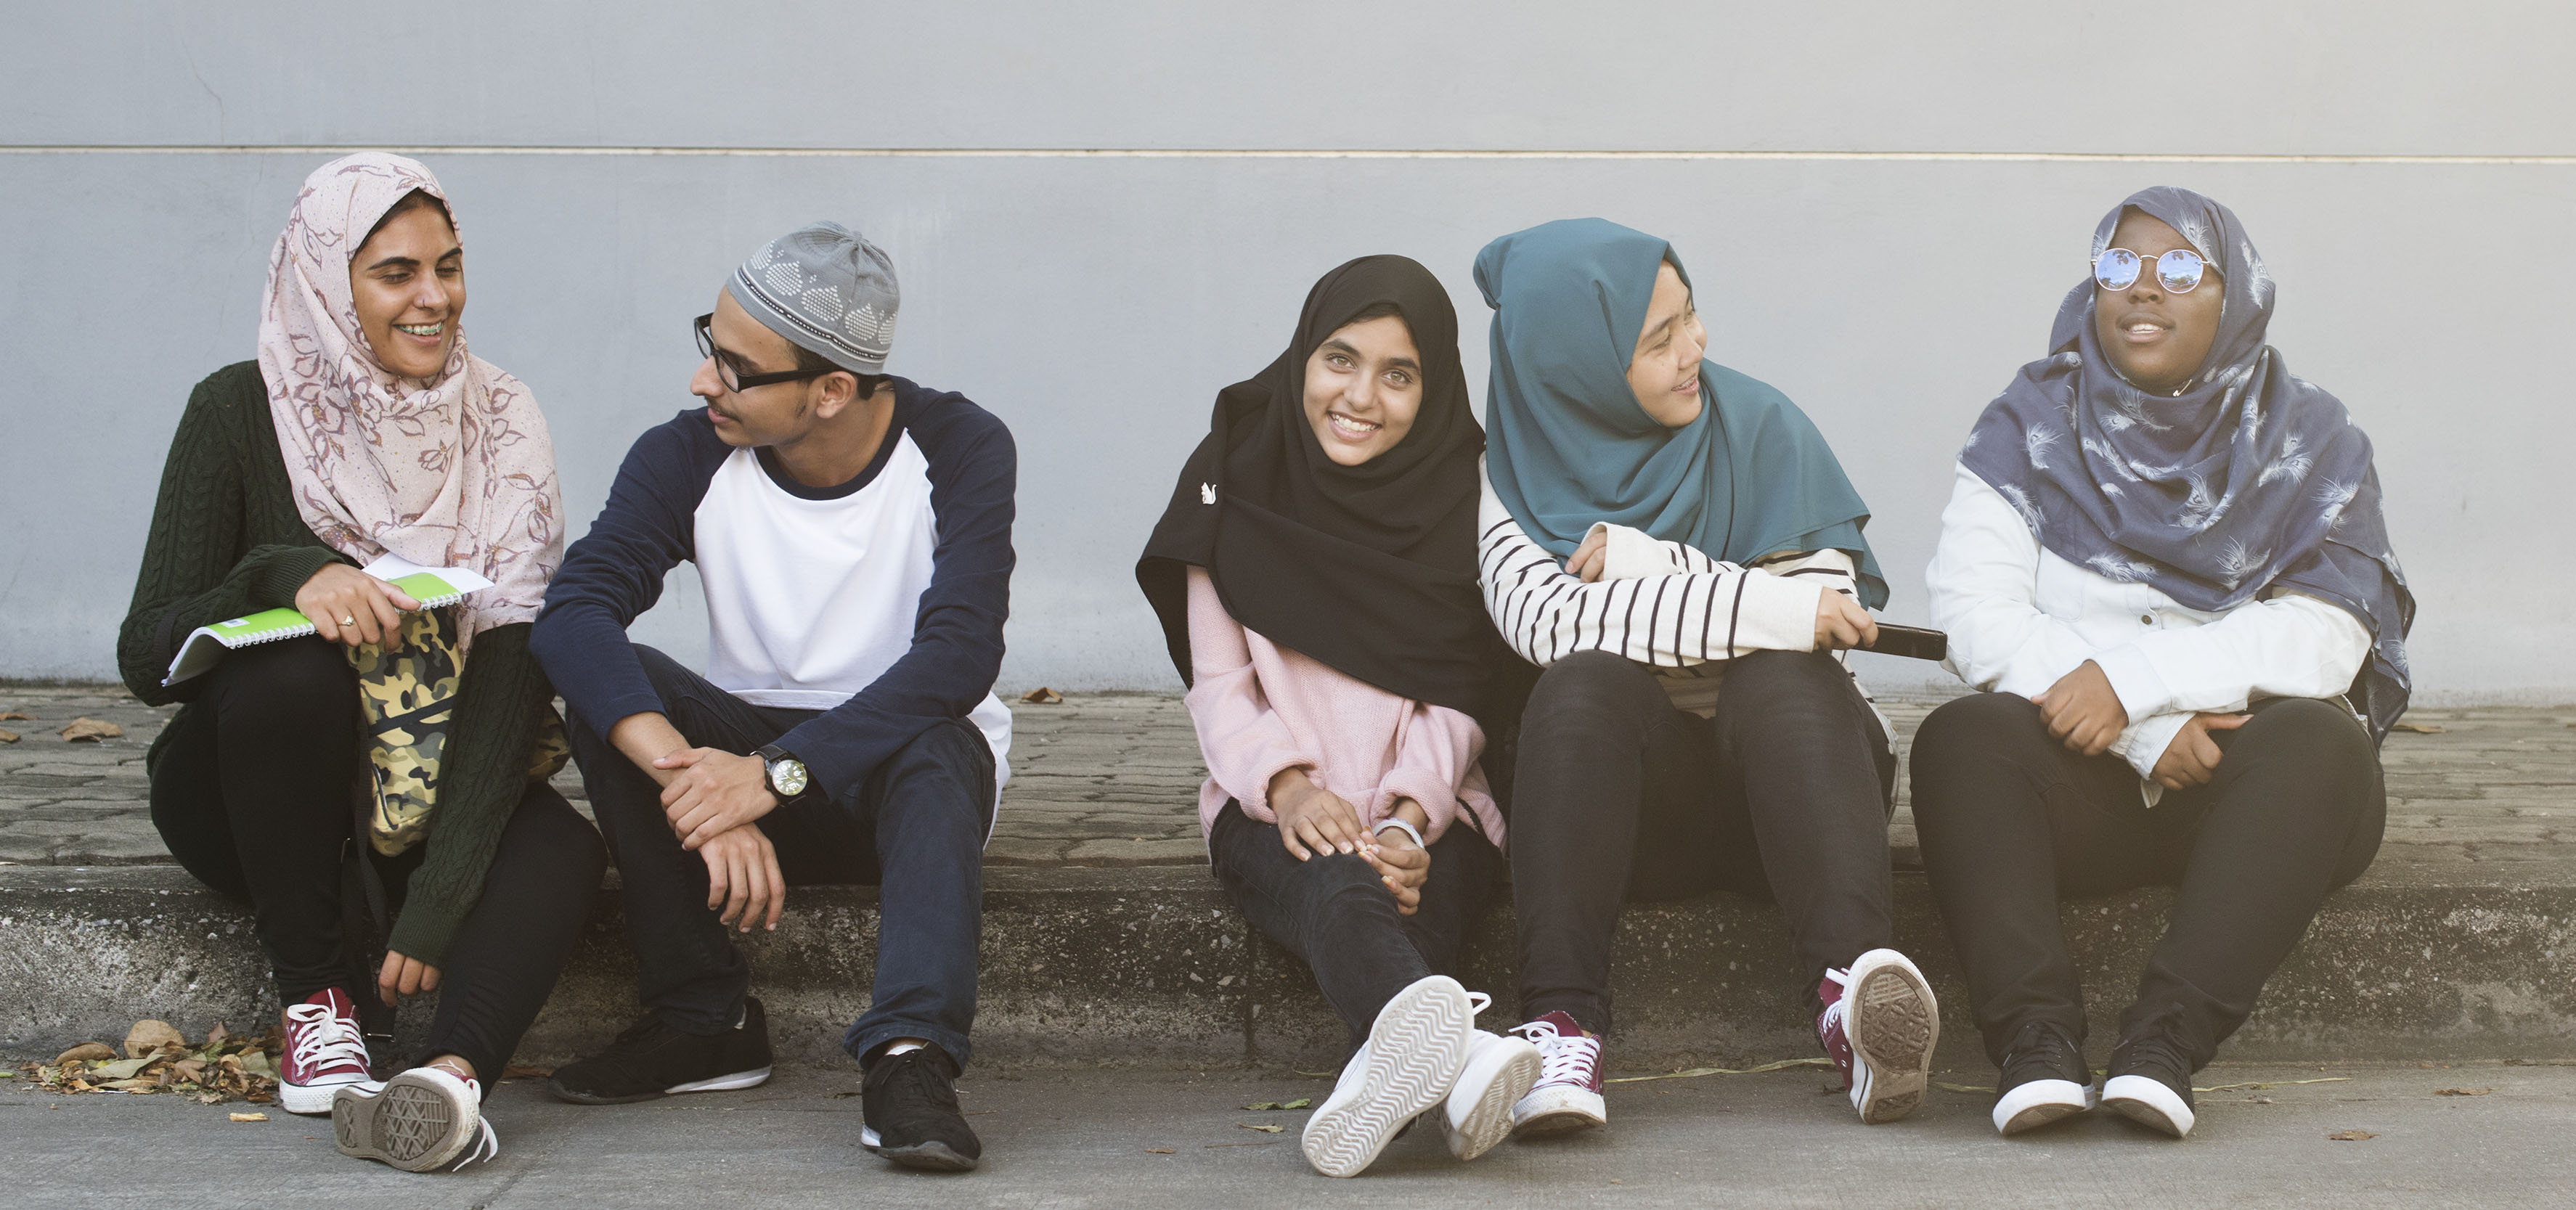 Sexmuslim 16sal - 11 Ways to Build modesty in Young Muslims | SoundVision.com